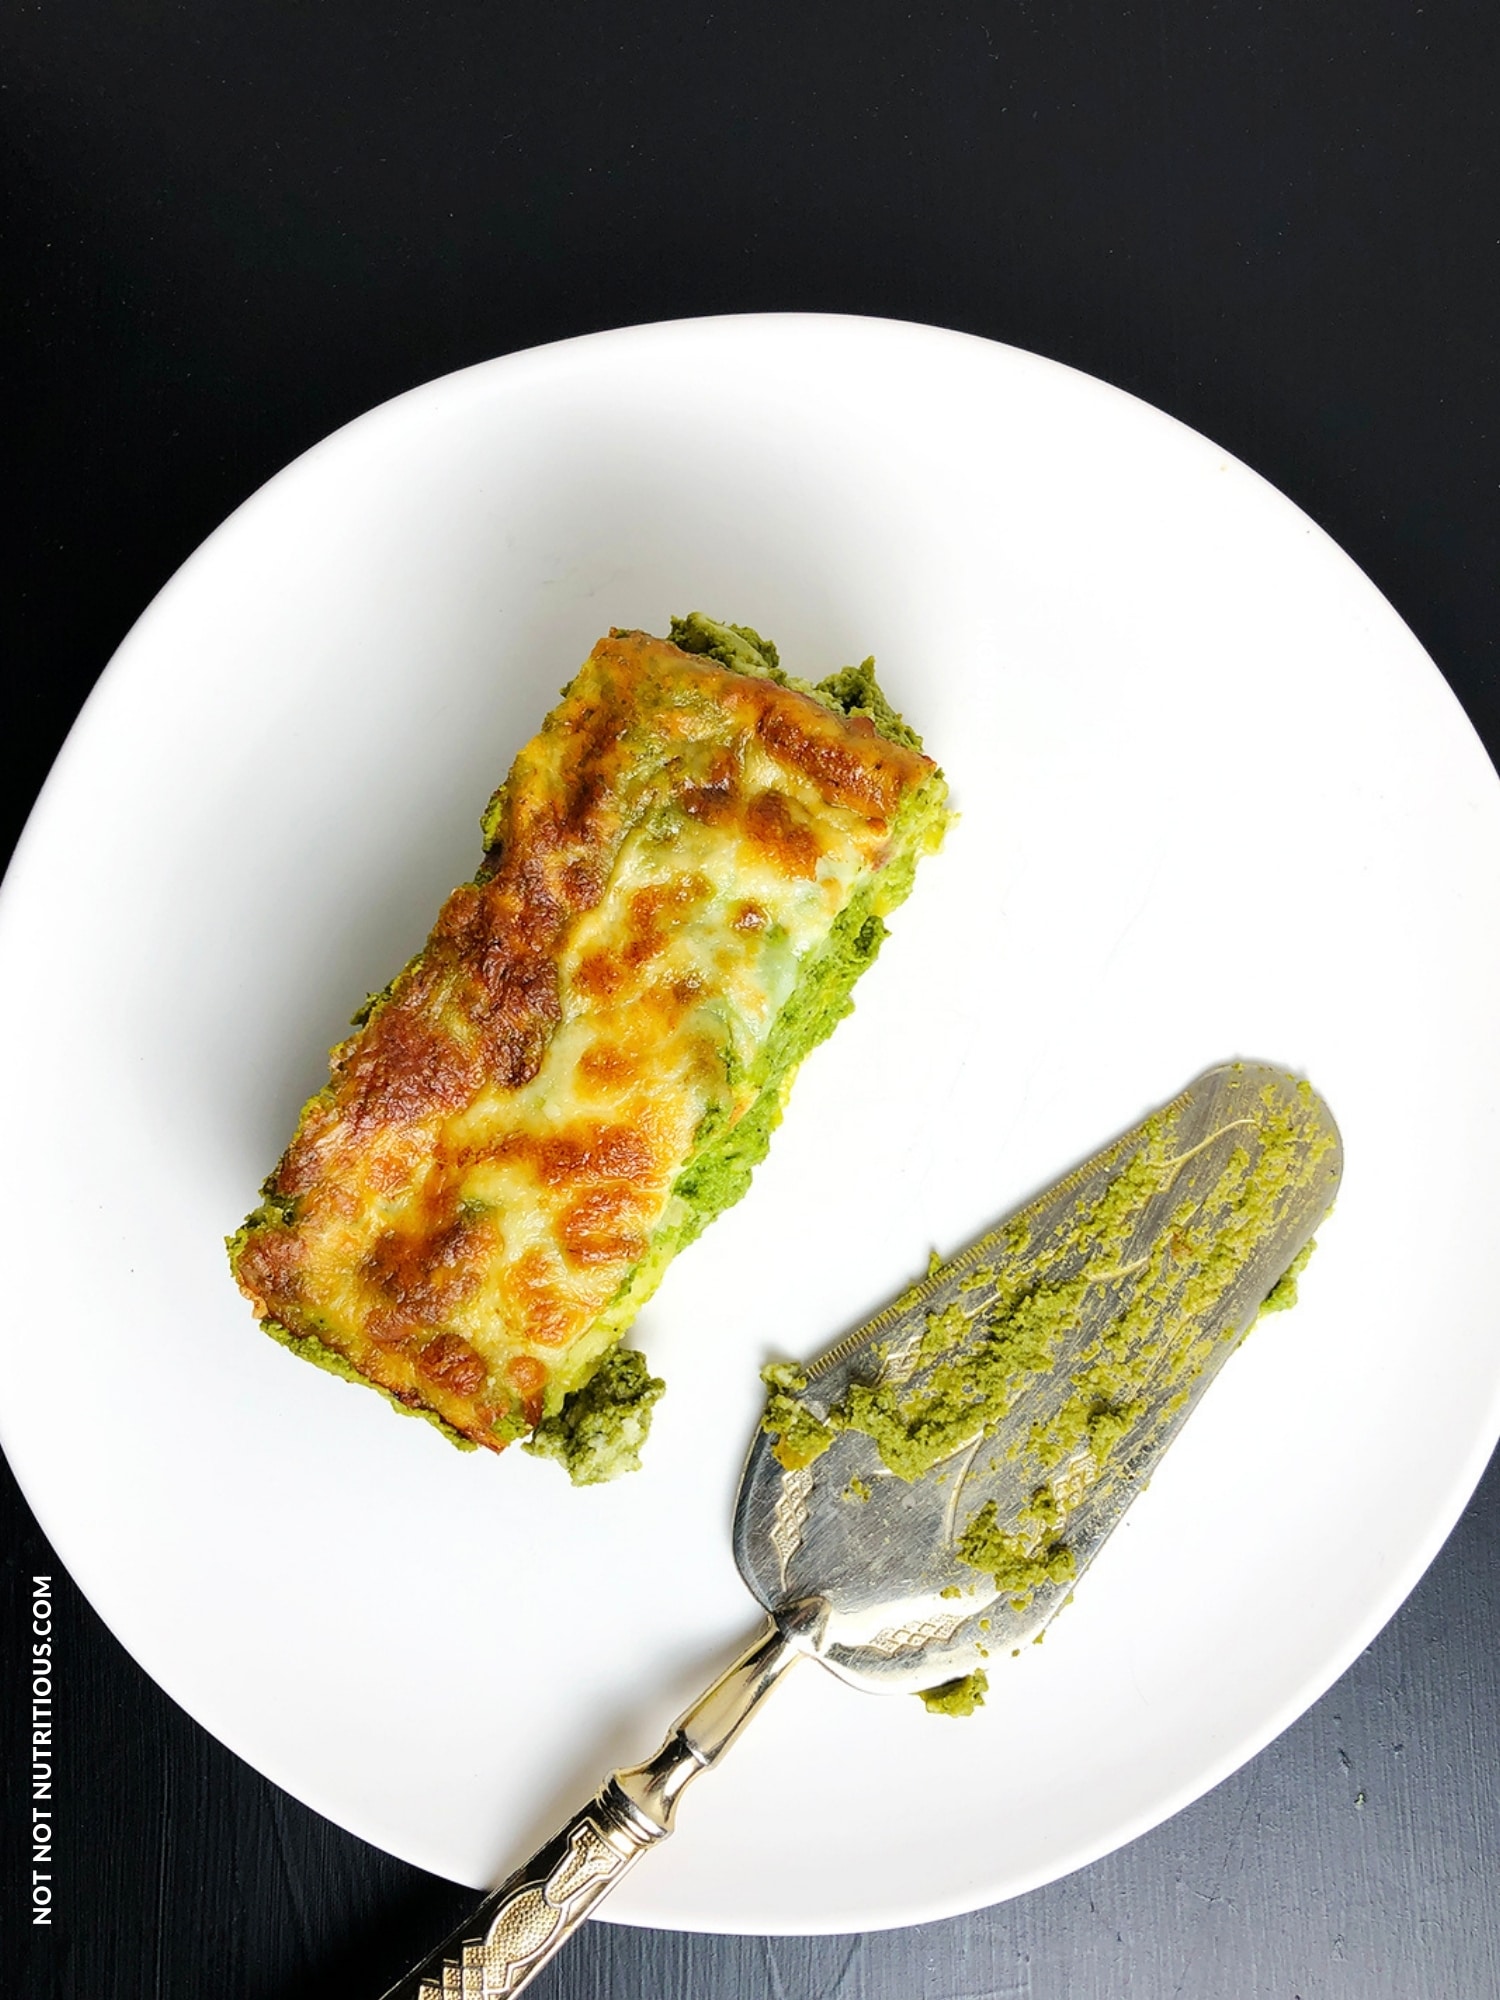 Top-down shot of slice of green lasagna on a white plate. A serving utensil sits next to the lasagna on the same plate.